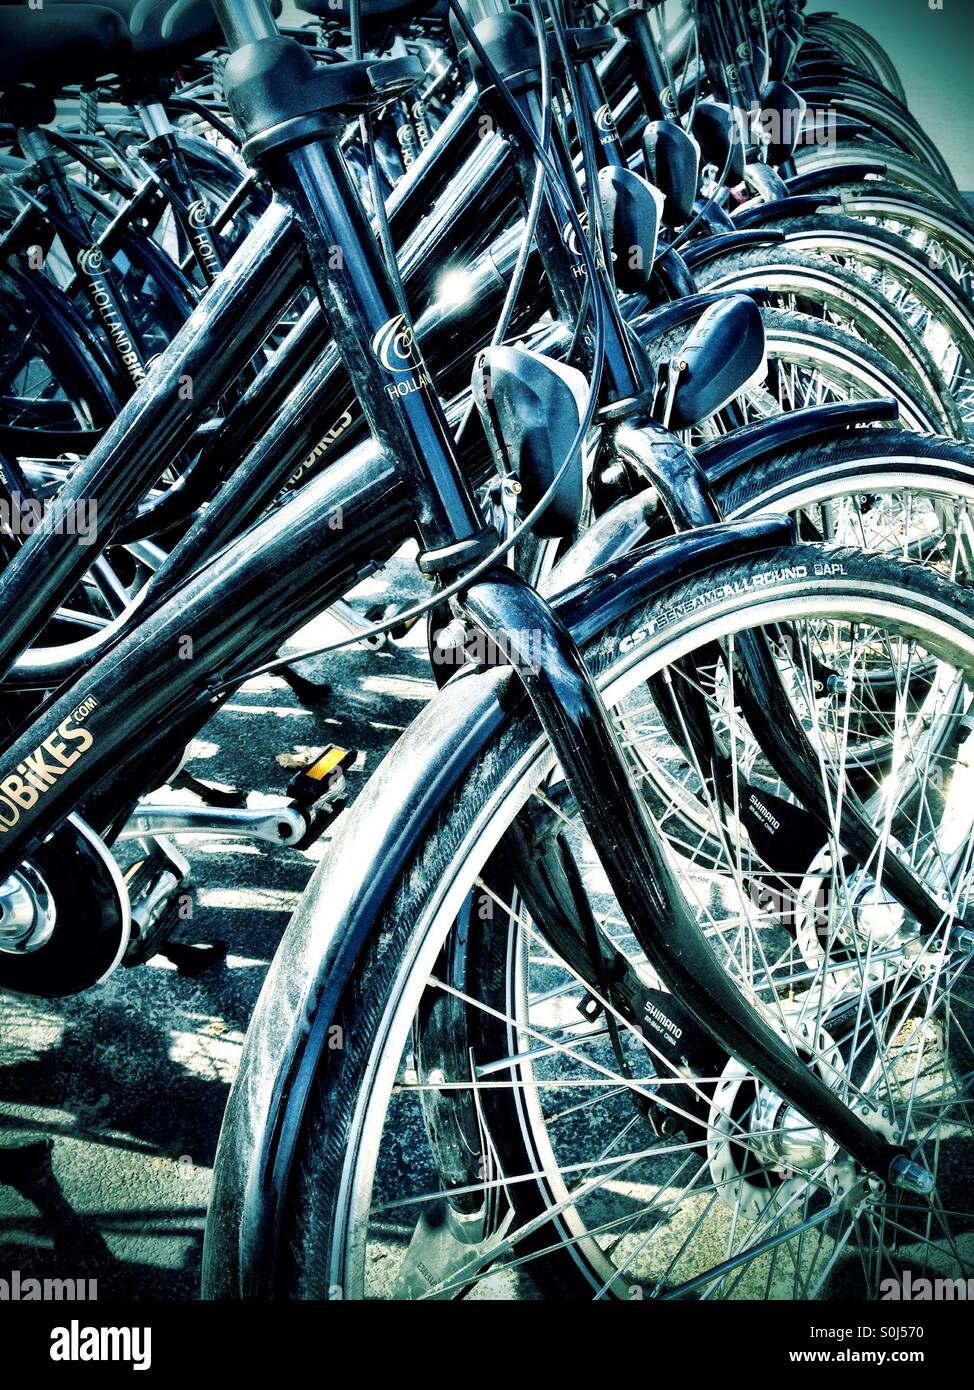 Parked Bicycles Stock Photo